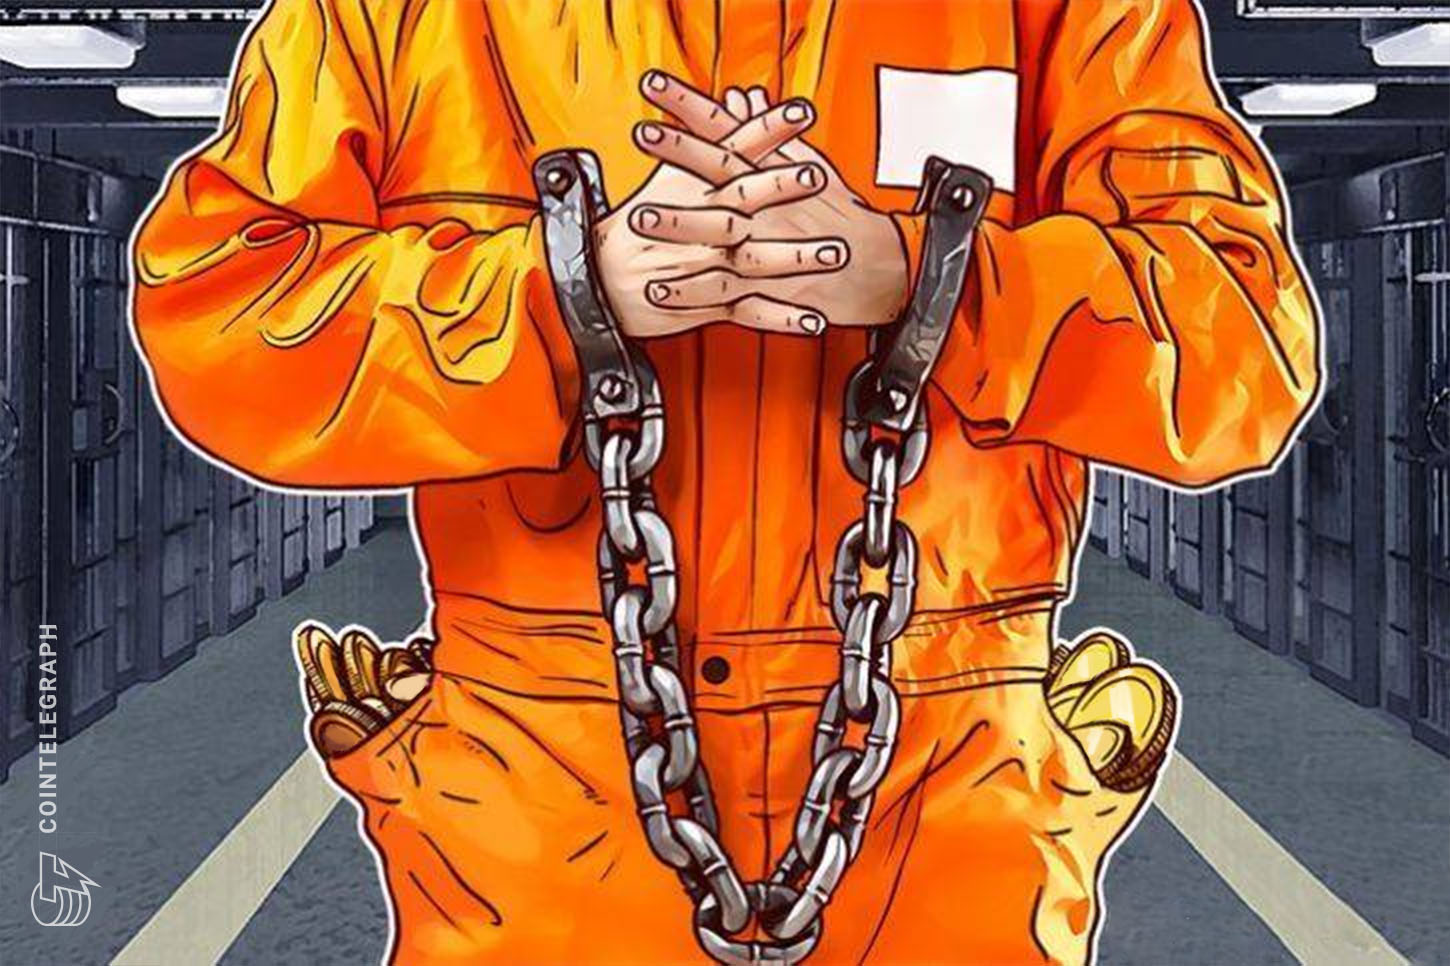 Crypto Founder Sentenced to Seven Years in Jail for $25 Million Rip-off